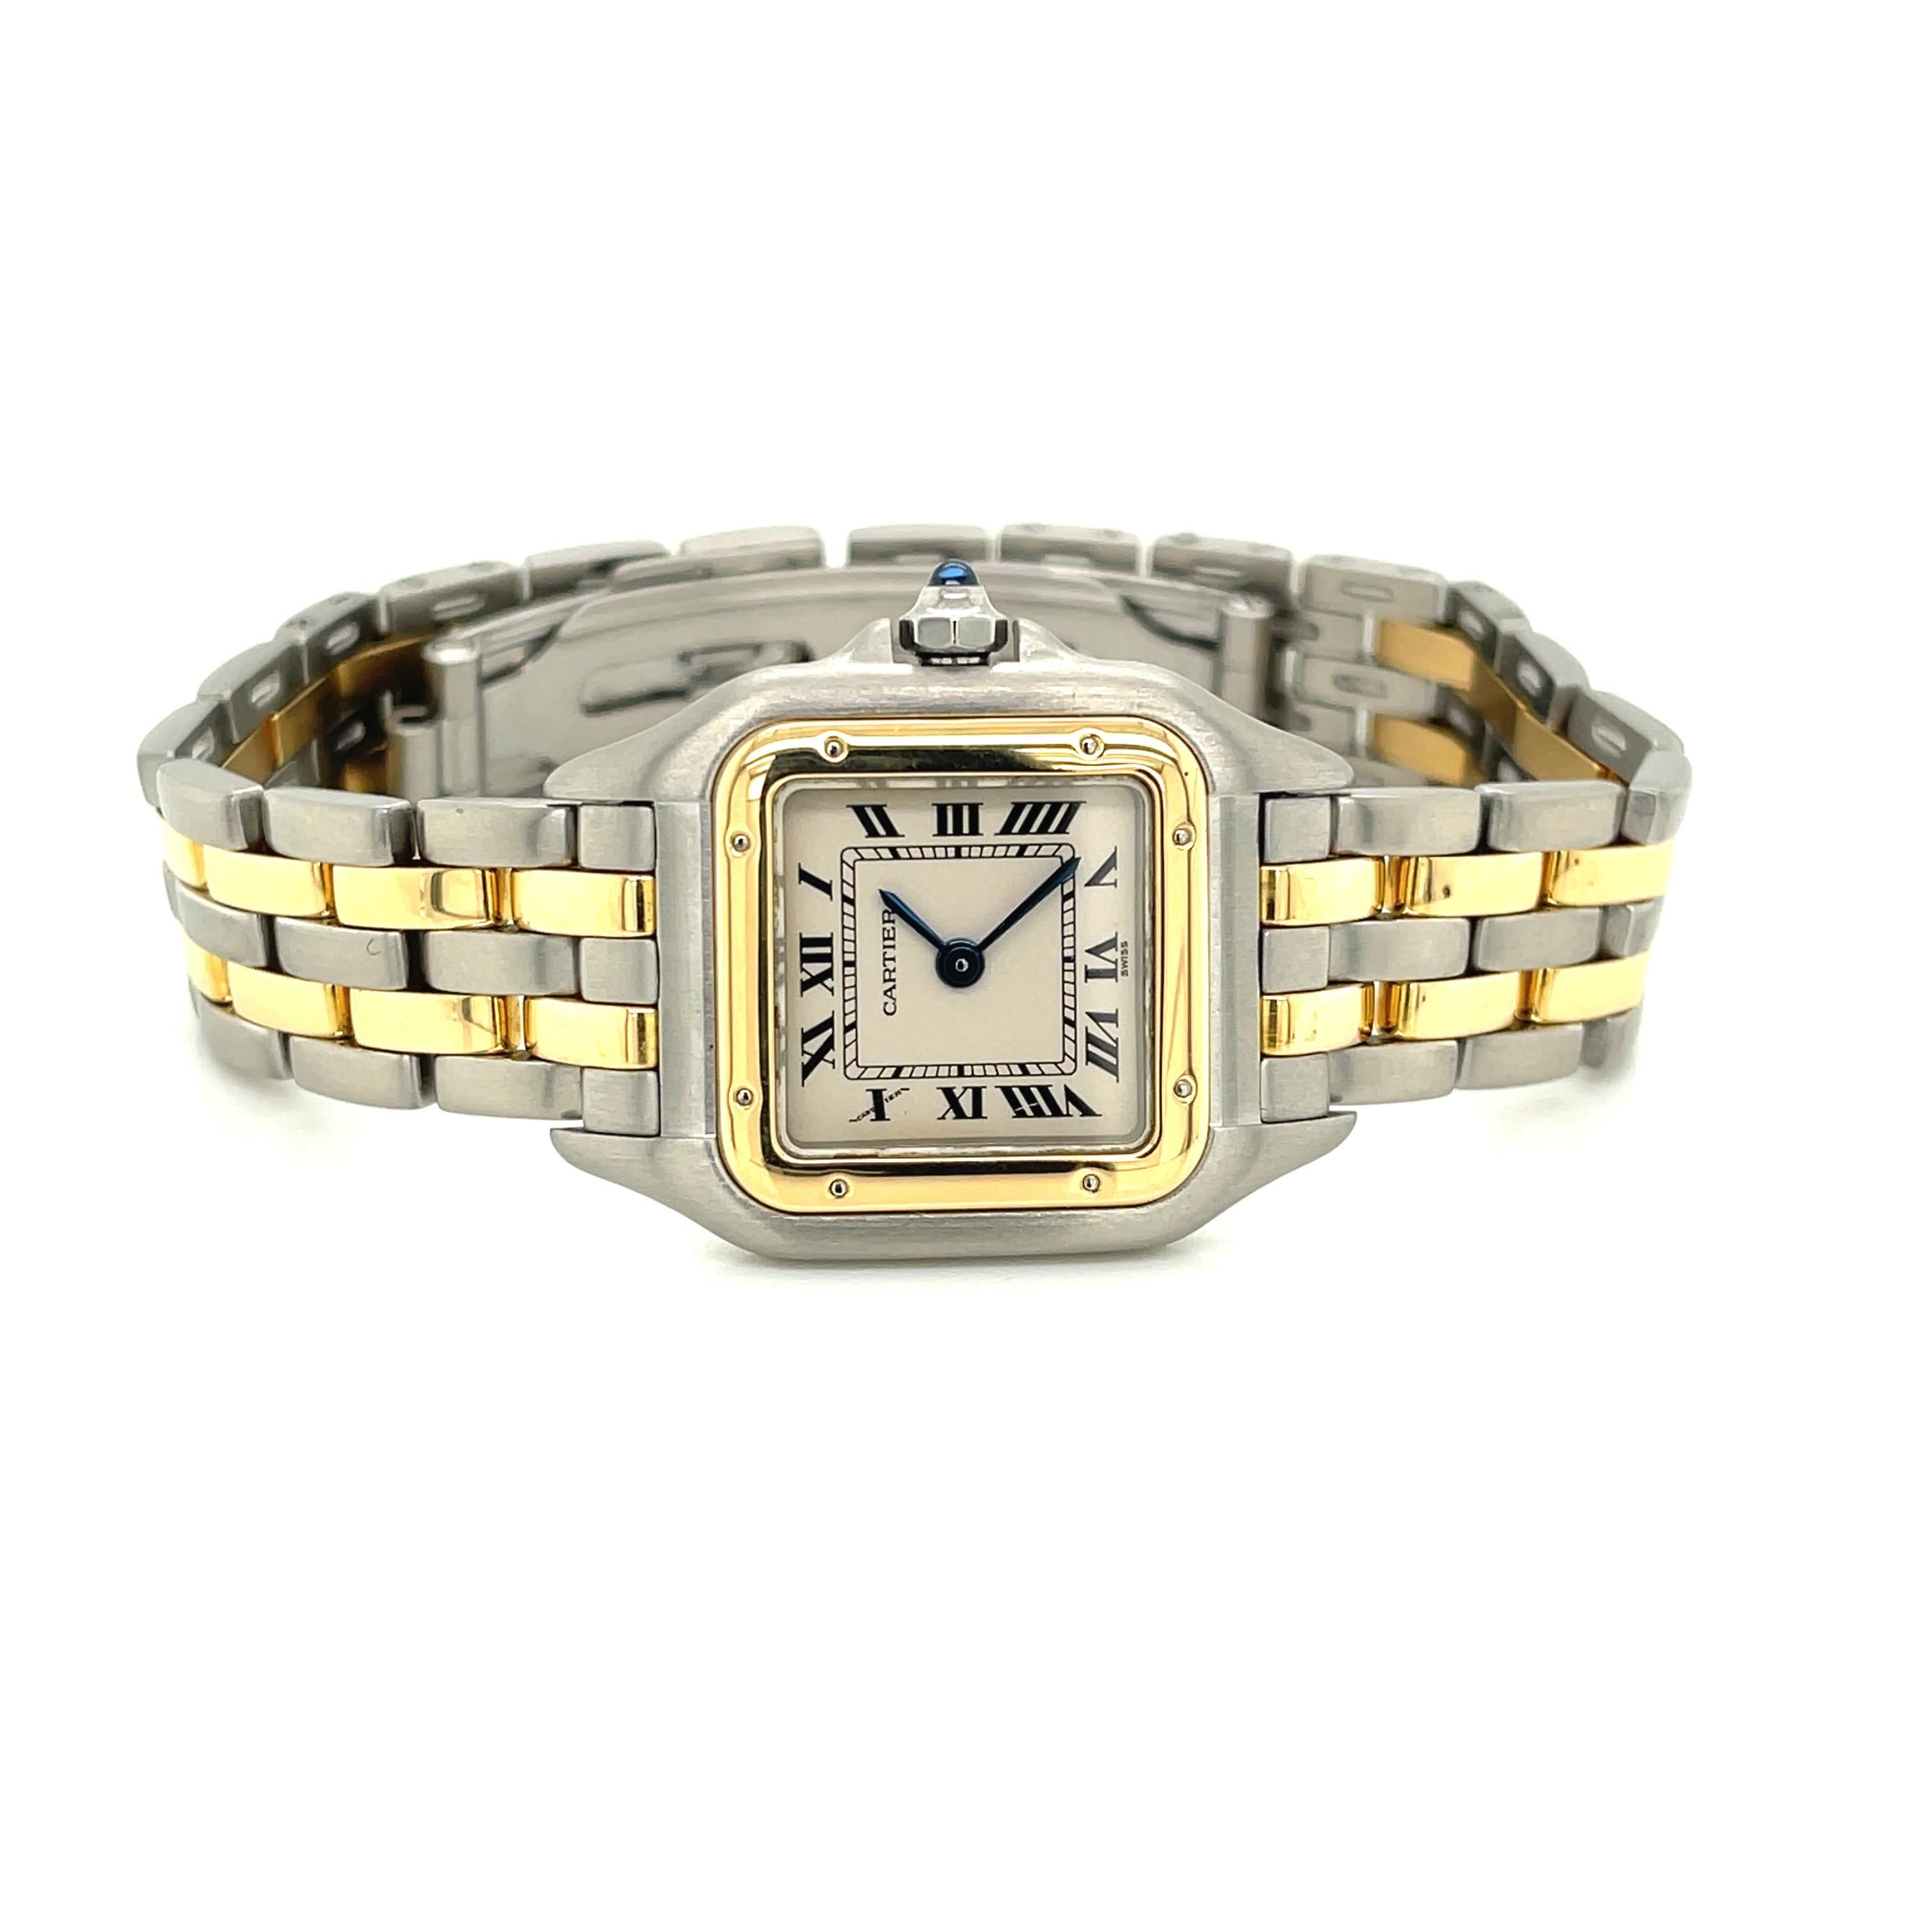 Introduced in the 80s and relevant today, this desirable Panthere de Cartier is the smaller model and is powered by a quartz movement. The 22mm x 30mm satin steel case has an 18 karat yellow gold bezel with rivet details. The thickness is a modest